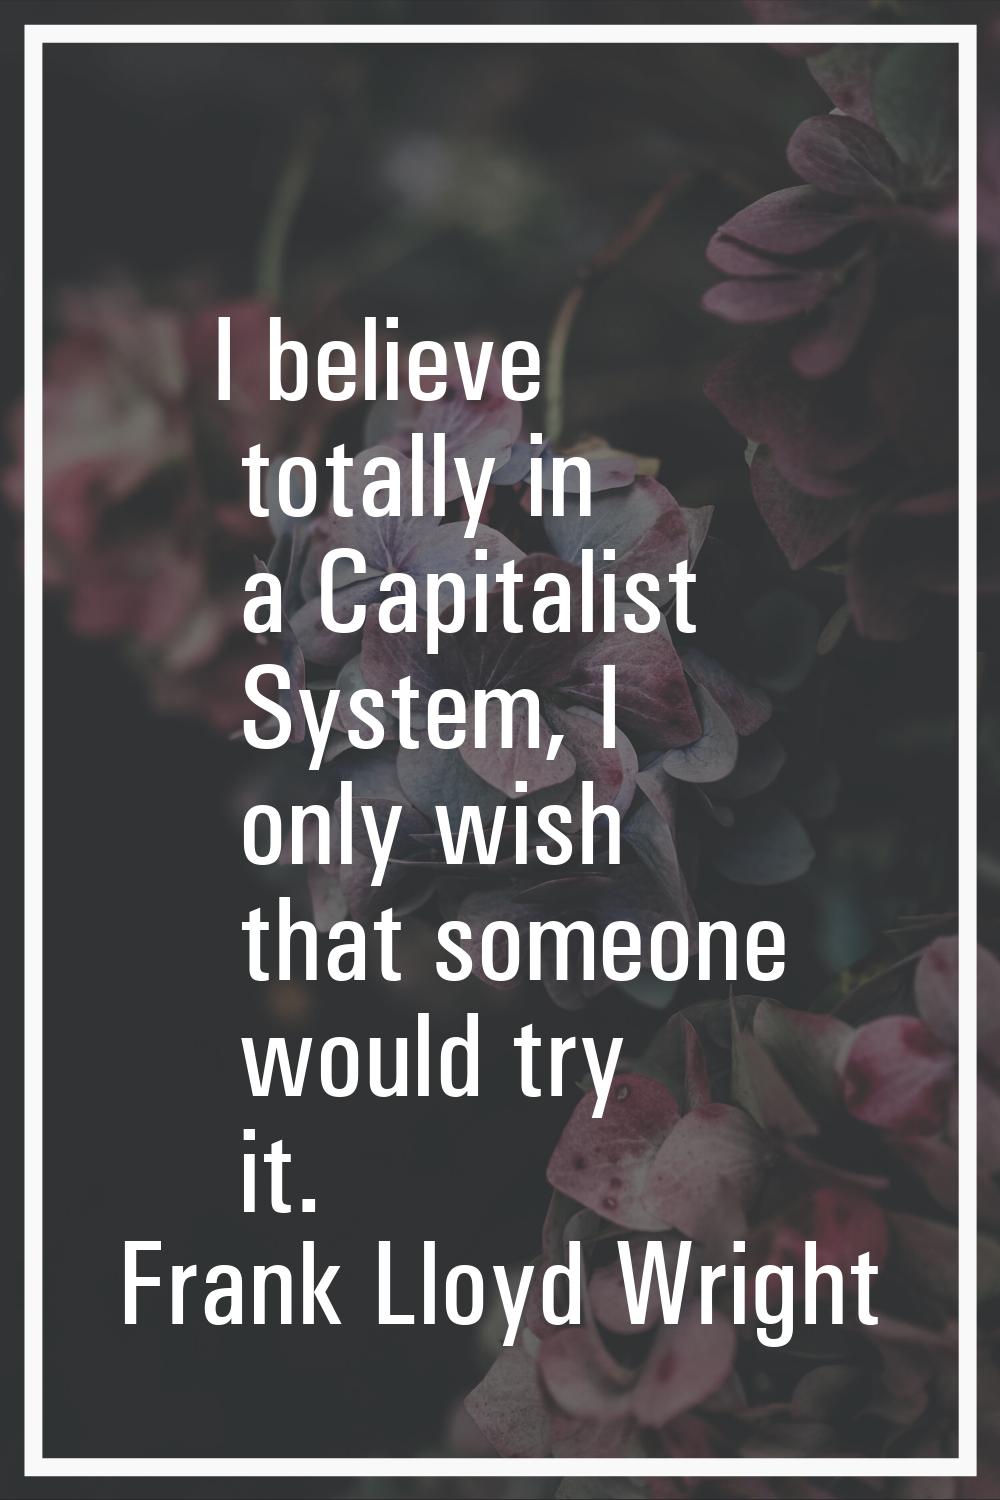 I believe totally in a Capitalist System, I only wish that someone would try it.